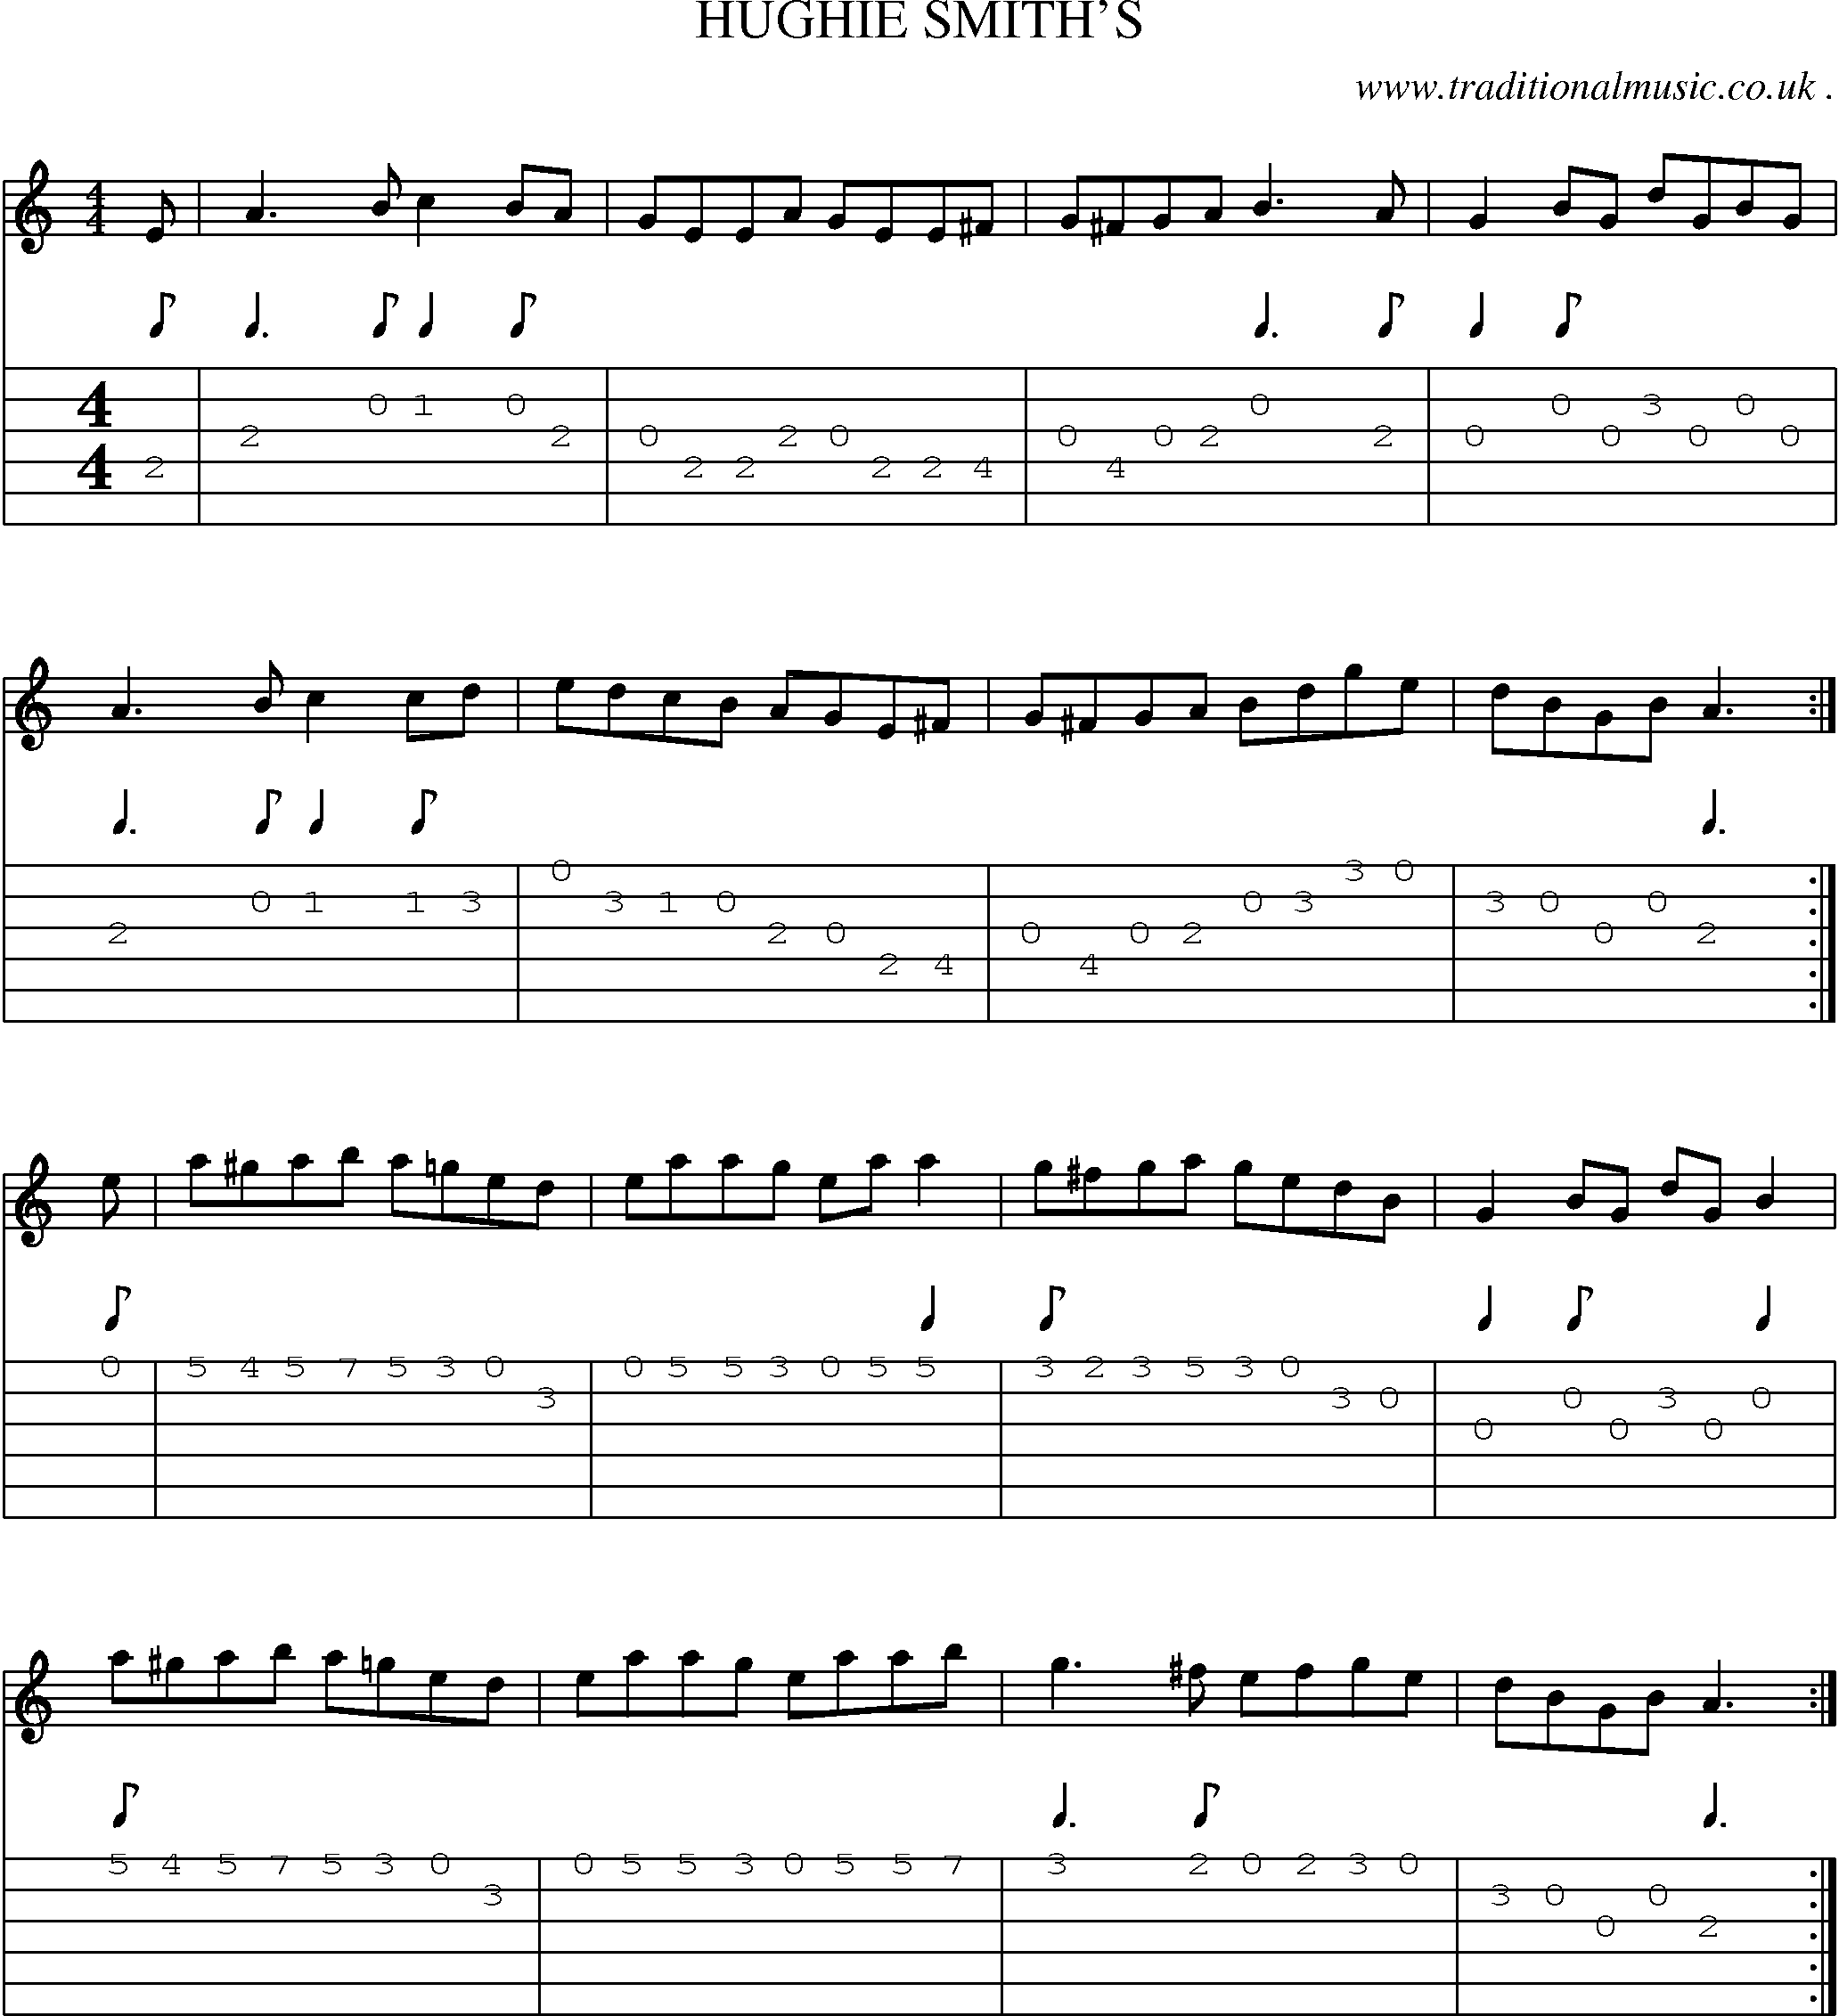 Sheet-Music and Guitar Tabs for Hughie Smiths